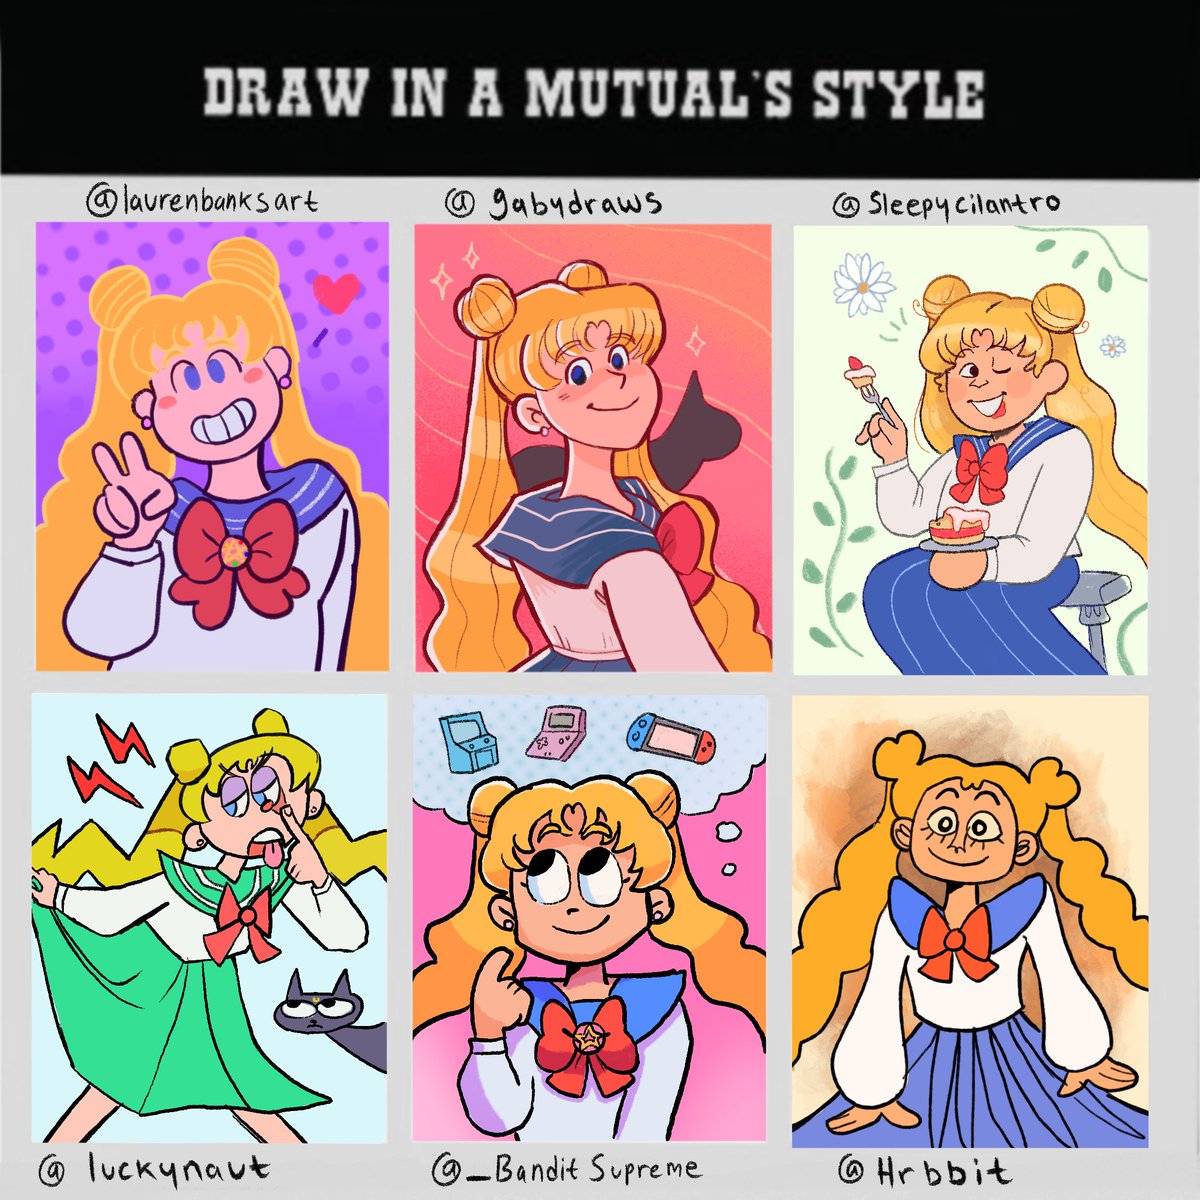 ok this was an insanely fun challenge!! analyzing these fun styles got my brain workin ? also got me going aaa!! Can't believe I know so many great artists 

go check out my mutuals w really cool art! @laurenbanksart @gabydraws @sleepycilantro @luckynaut @_BanditSupreme @Hrbbit 